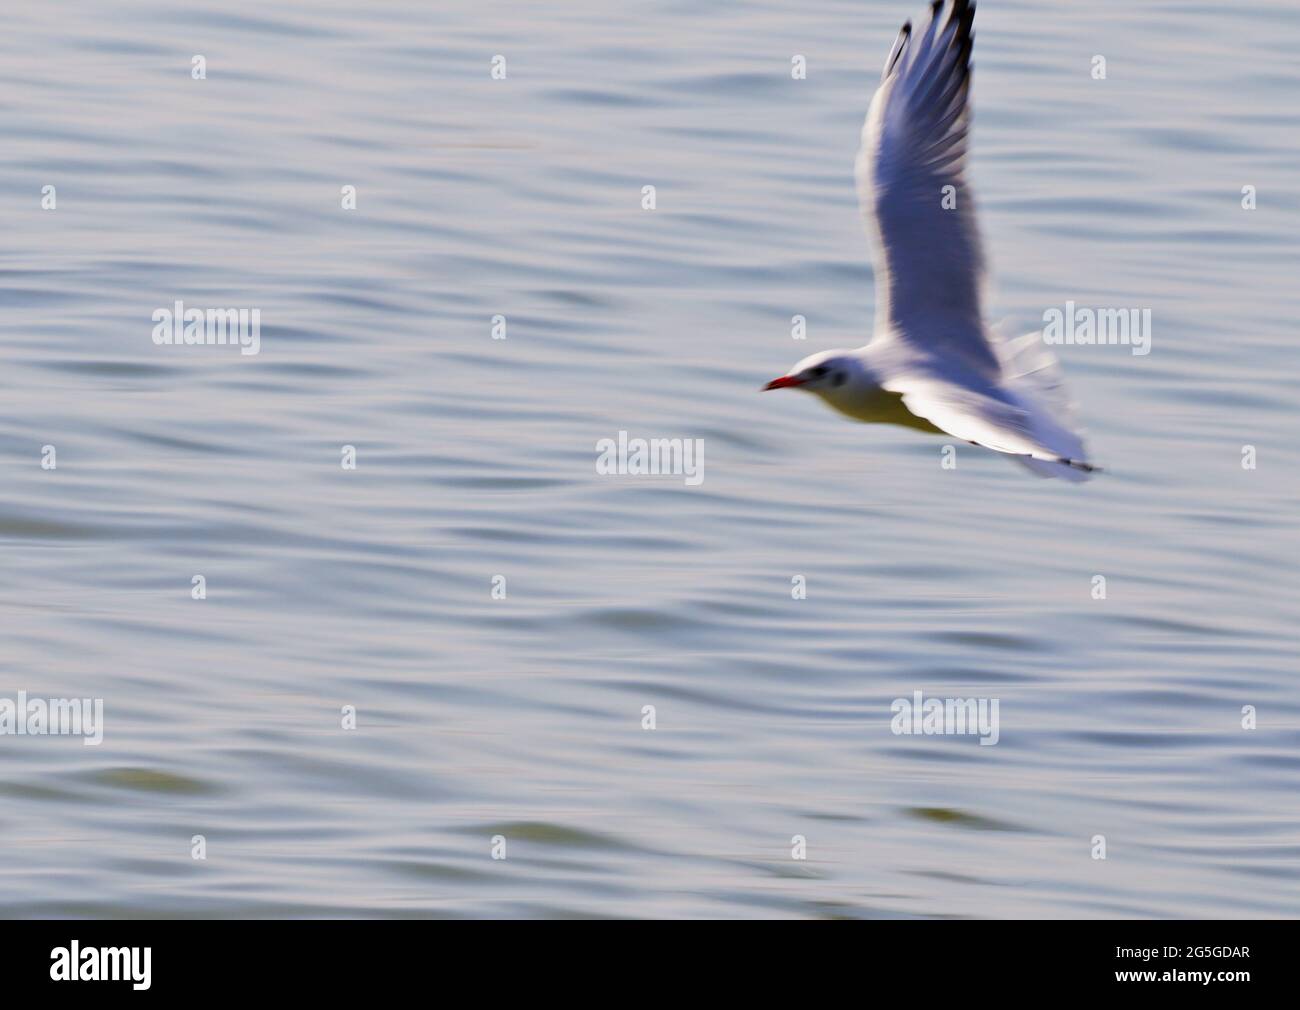 Seagull flying over open water Stock Photo